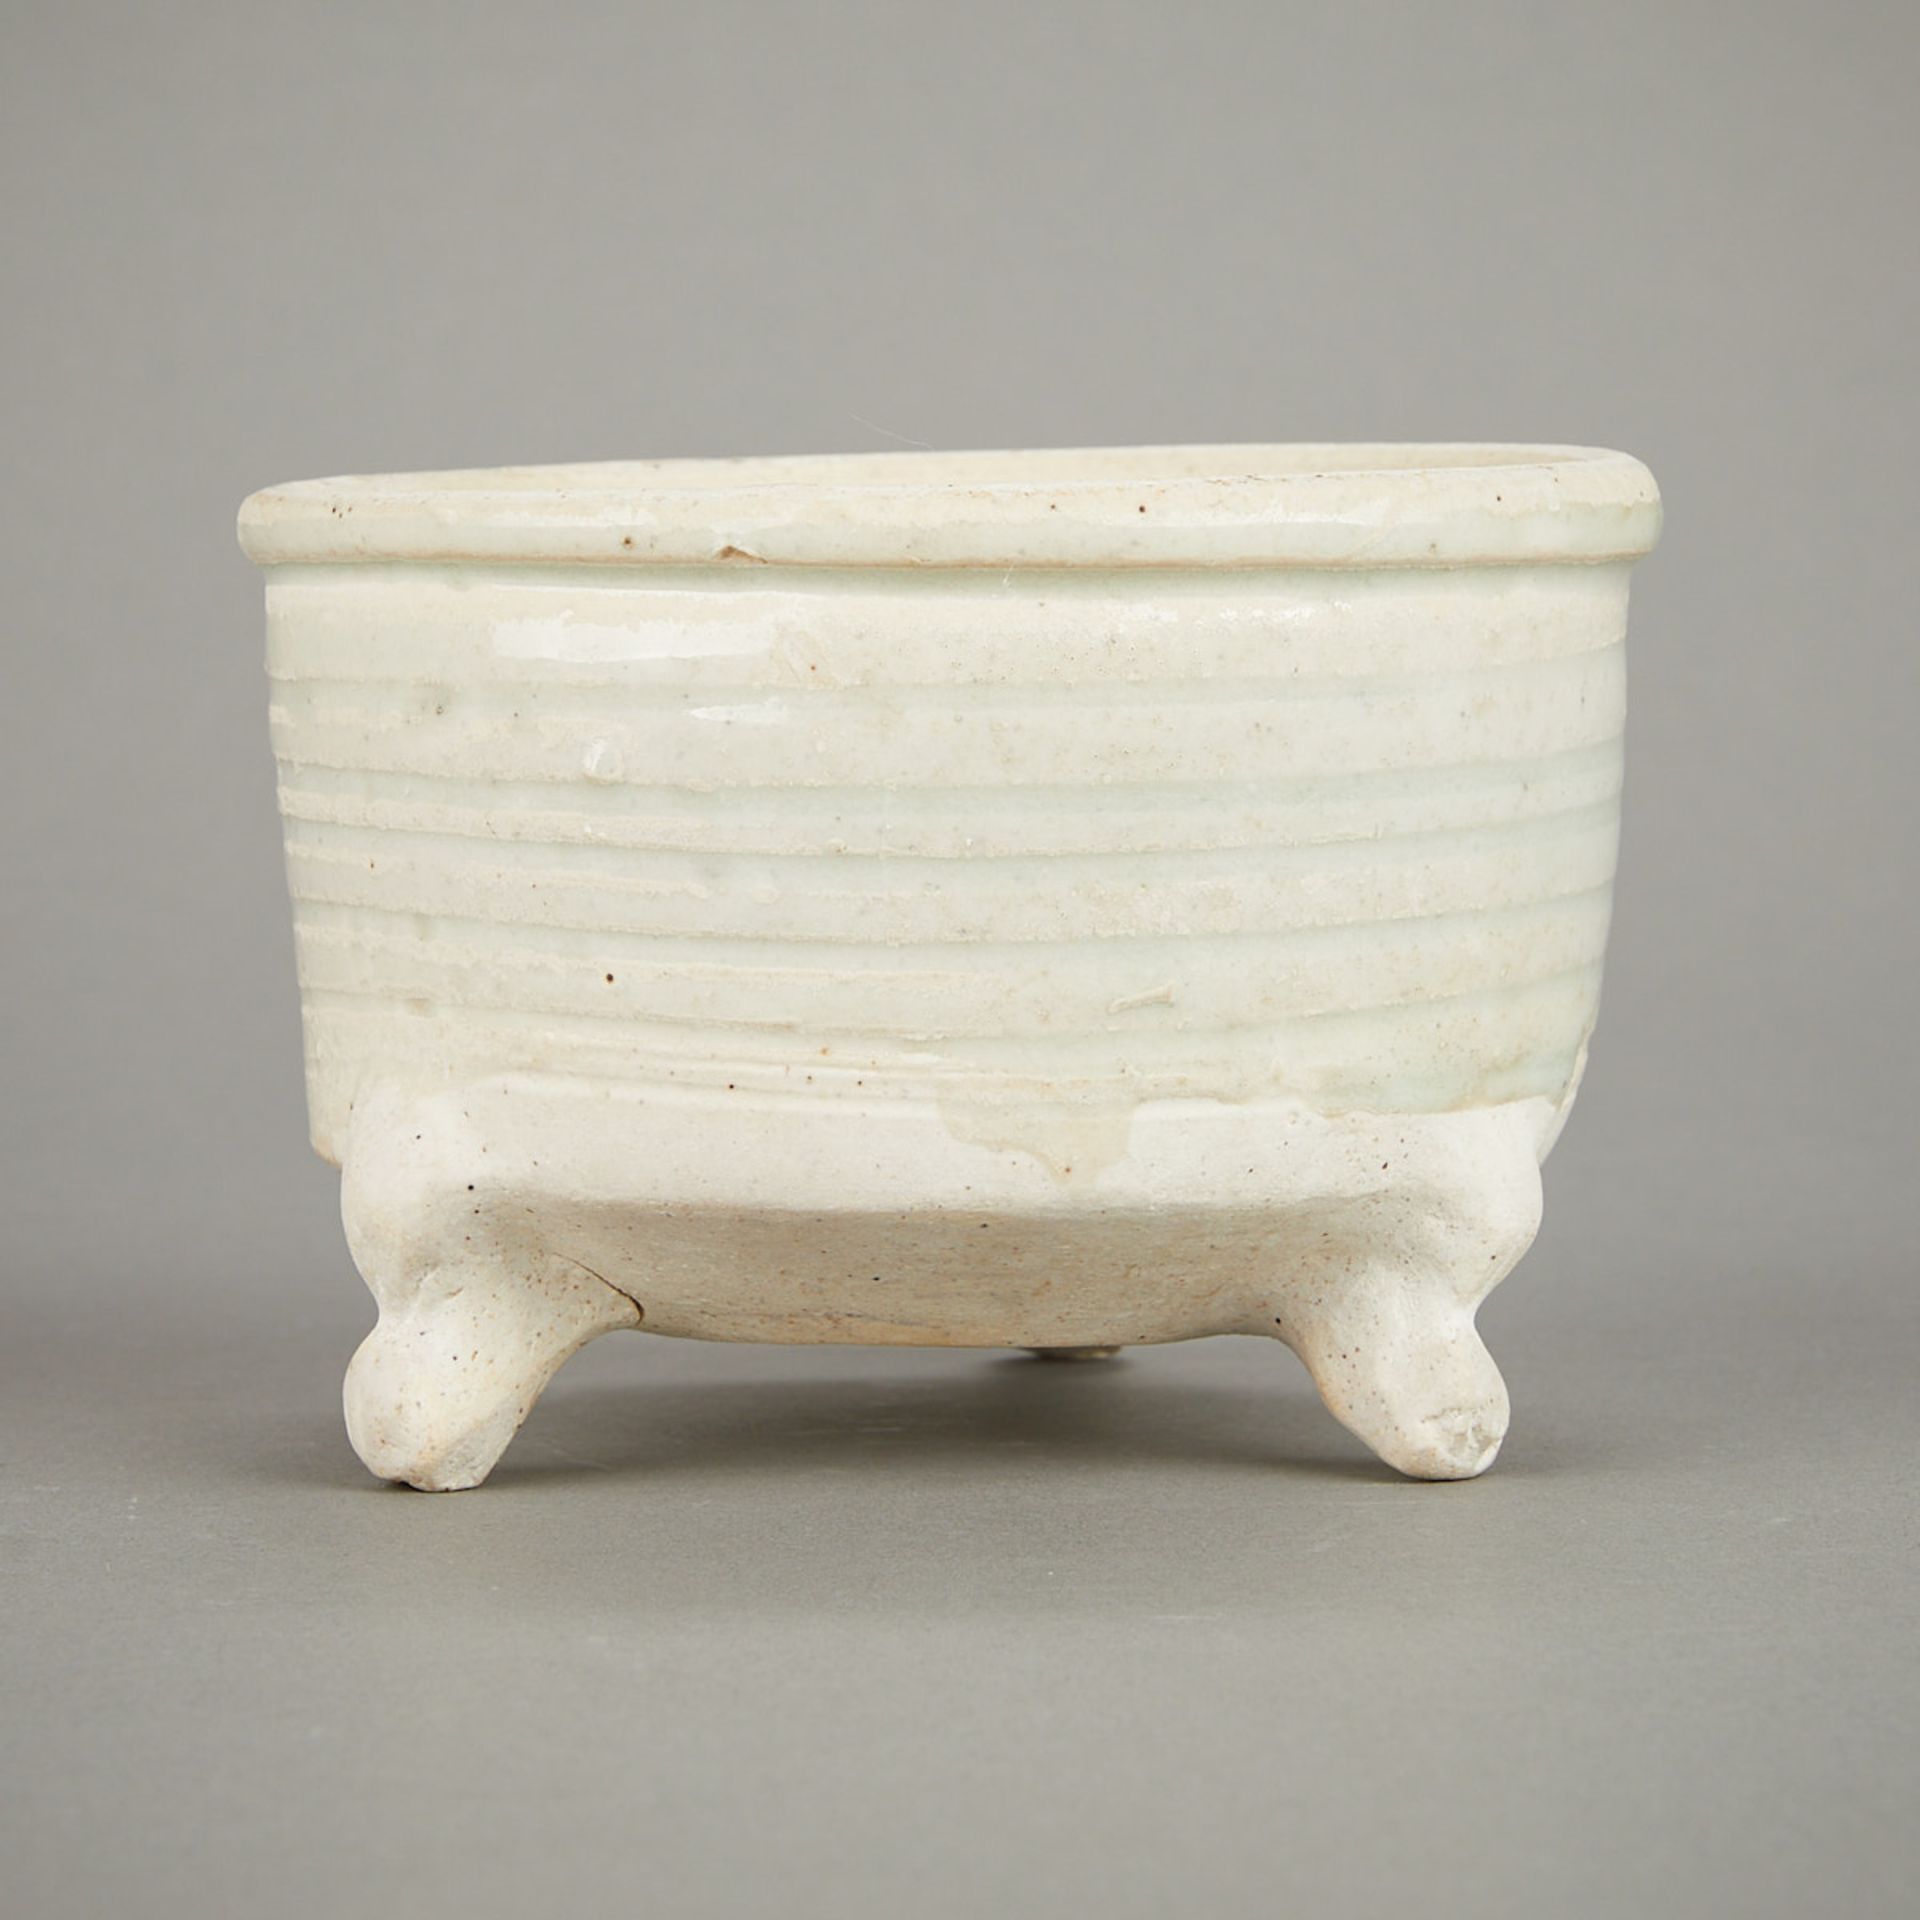 Chinese Song Ceramic Tripod Censer - Image 3 of 8